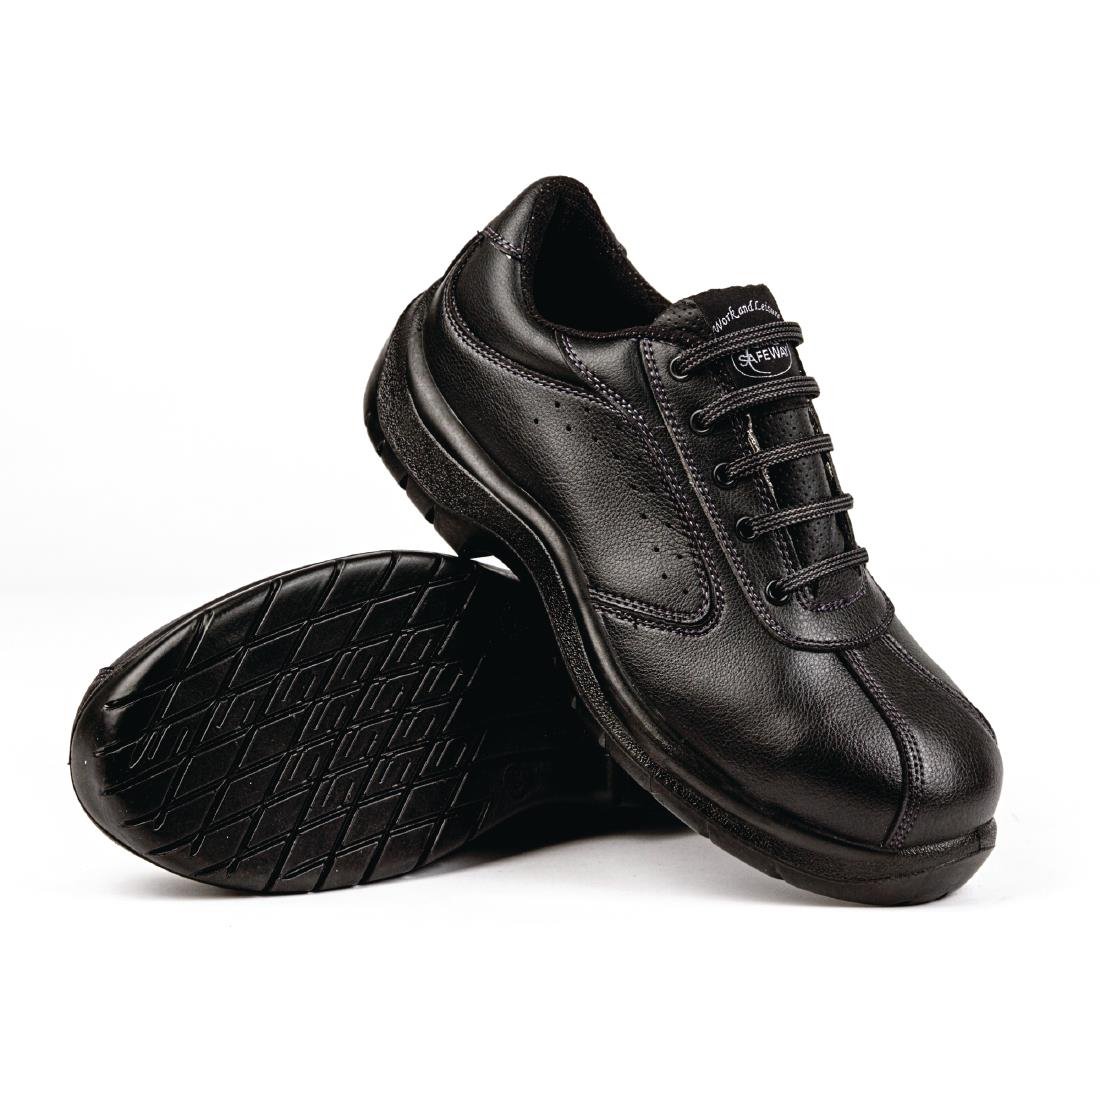 Lites Black Side Perforated Lace Up Shoes